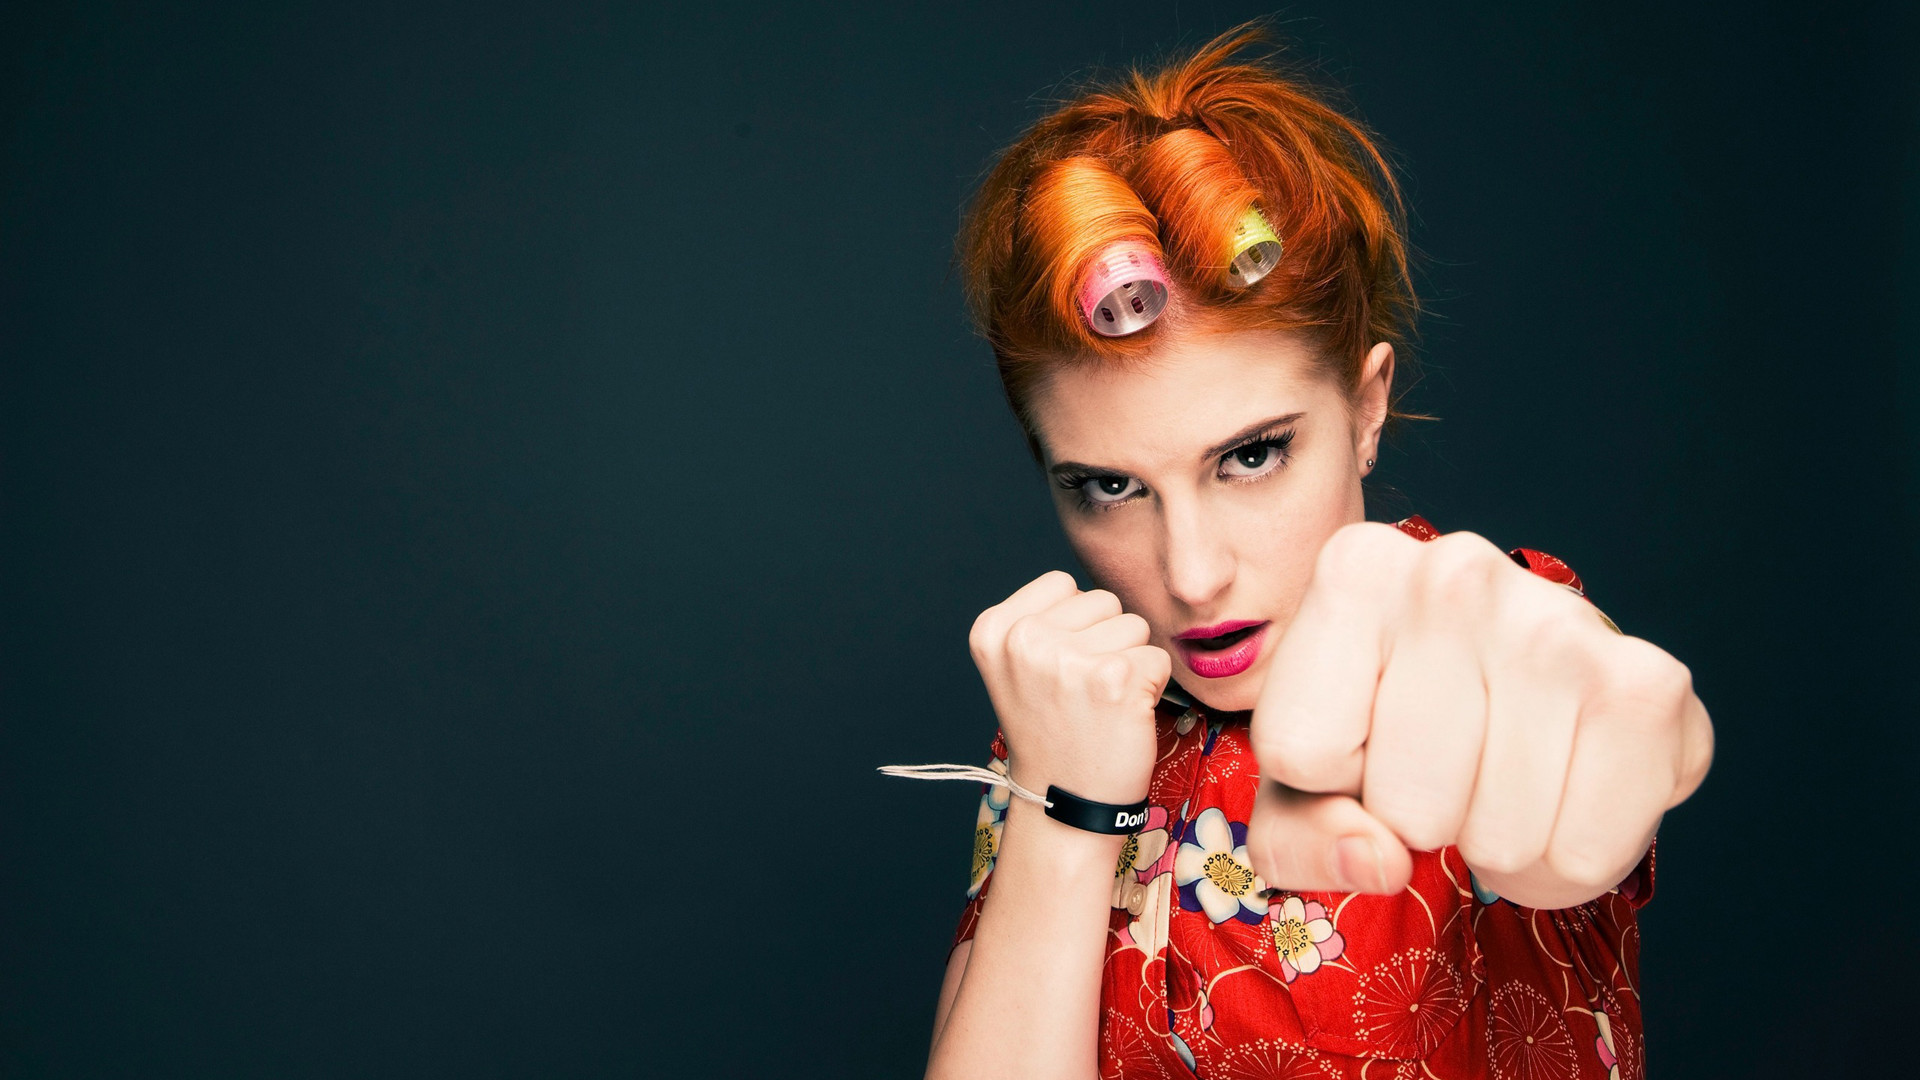 1920x1080 29, 2015 By Stephen Comments Off on Hayley Williams 2015 Wallpaper .